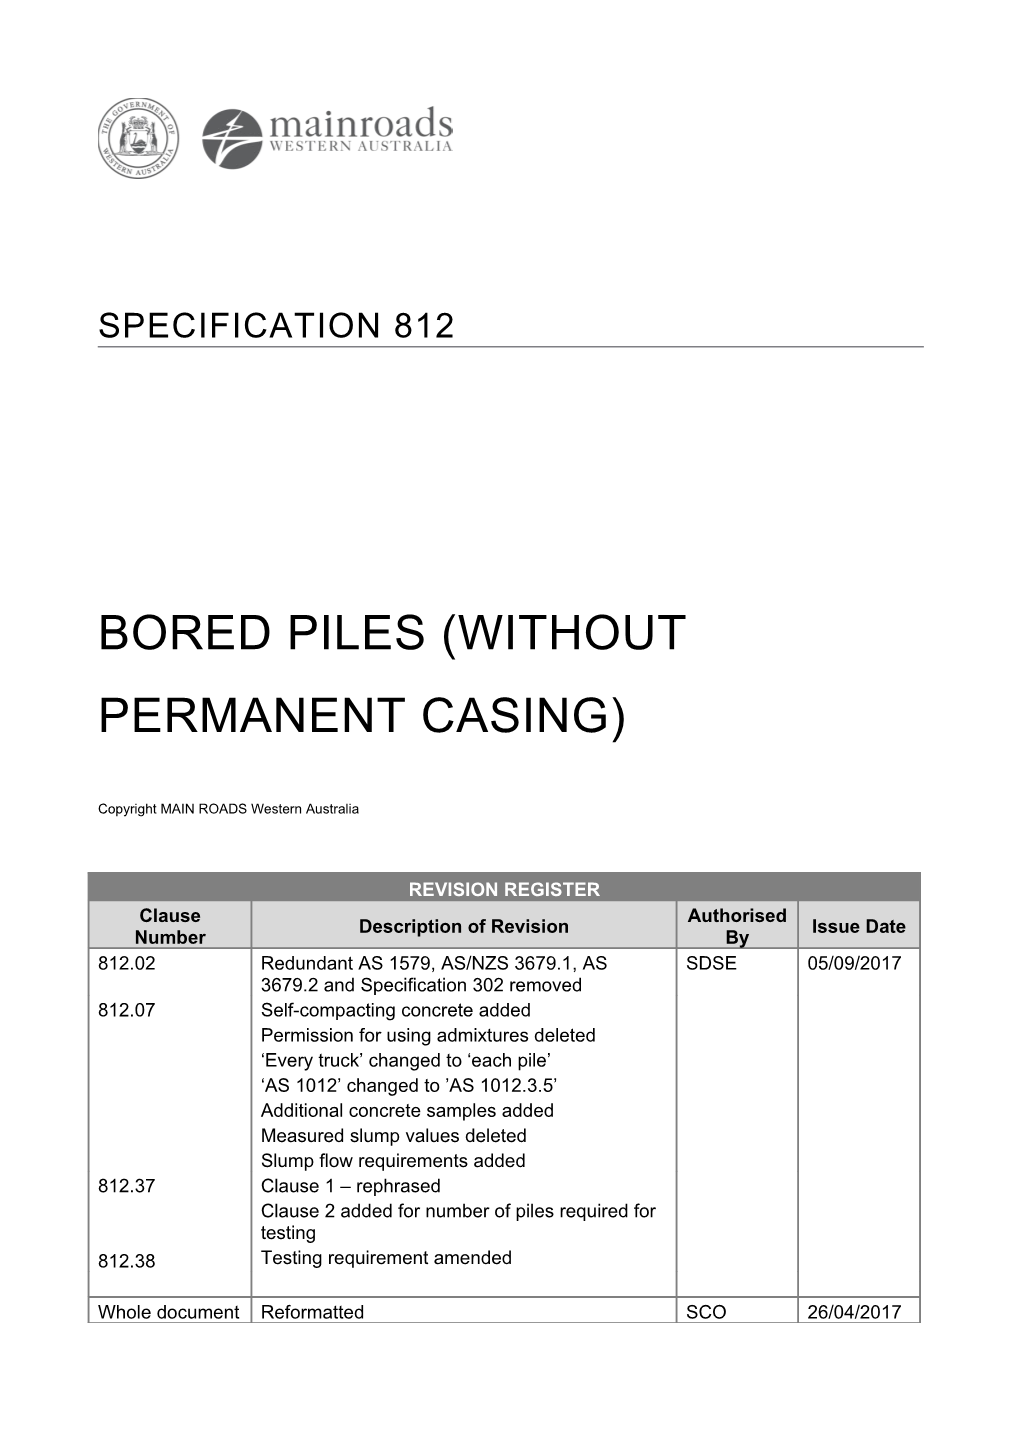 Bored Piles (Without Permanent Casing)